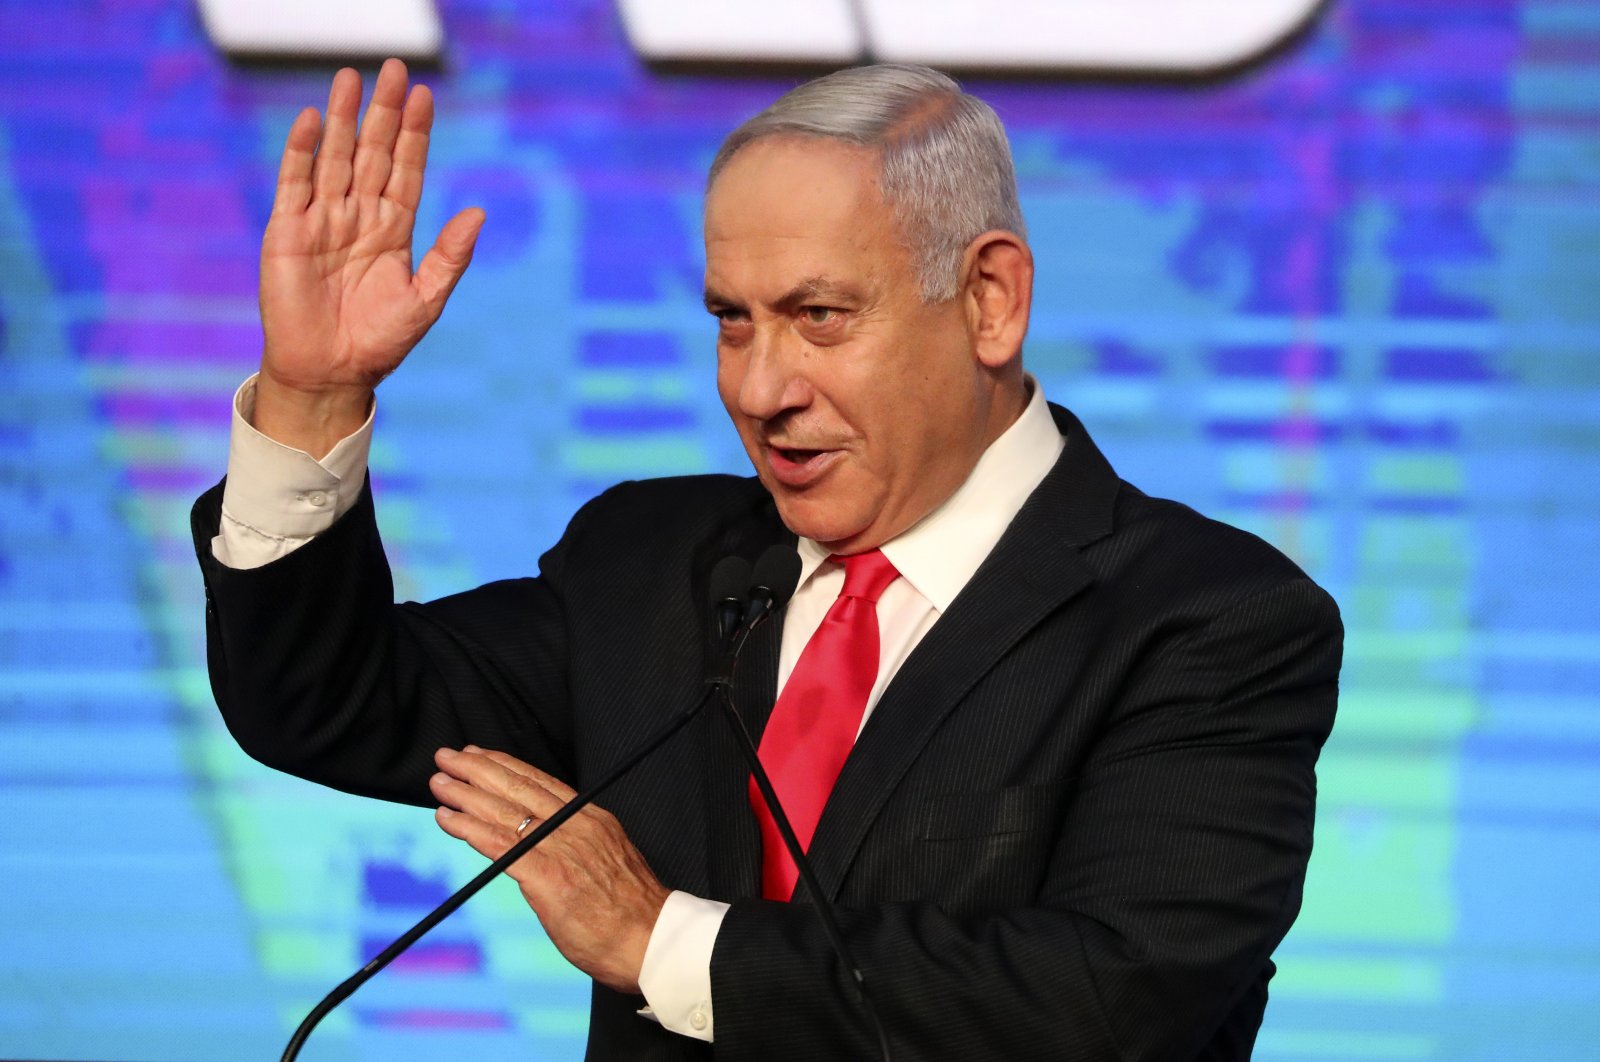 Israeli Prime Minister Benjamin Netanyahu addresses his supporters after the first exit poll results for the Israeli parliamentary elections at his Likud party's headquarters in Jerusalem, Israel, March 24, 2021. (AP Photo)